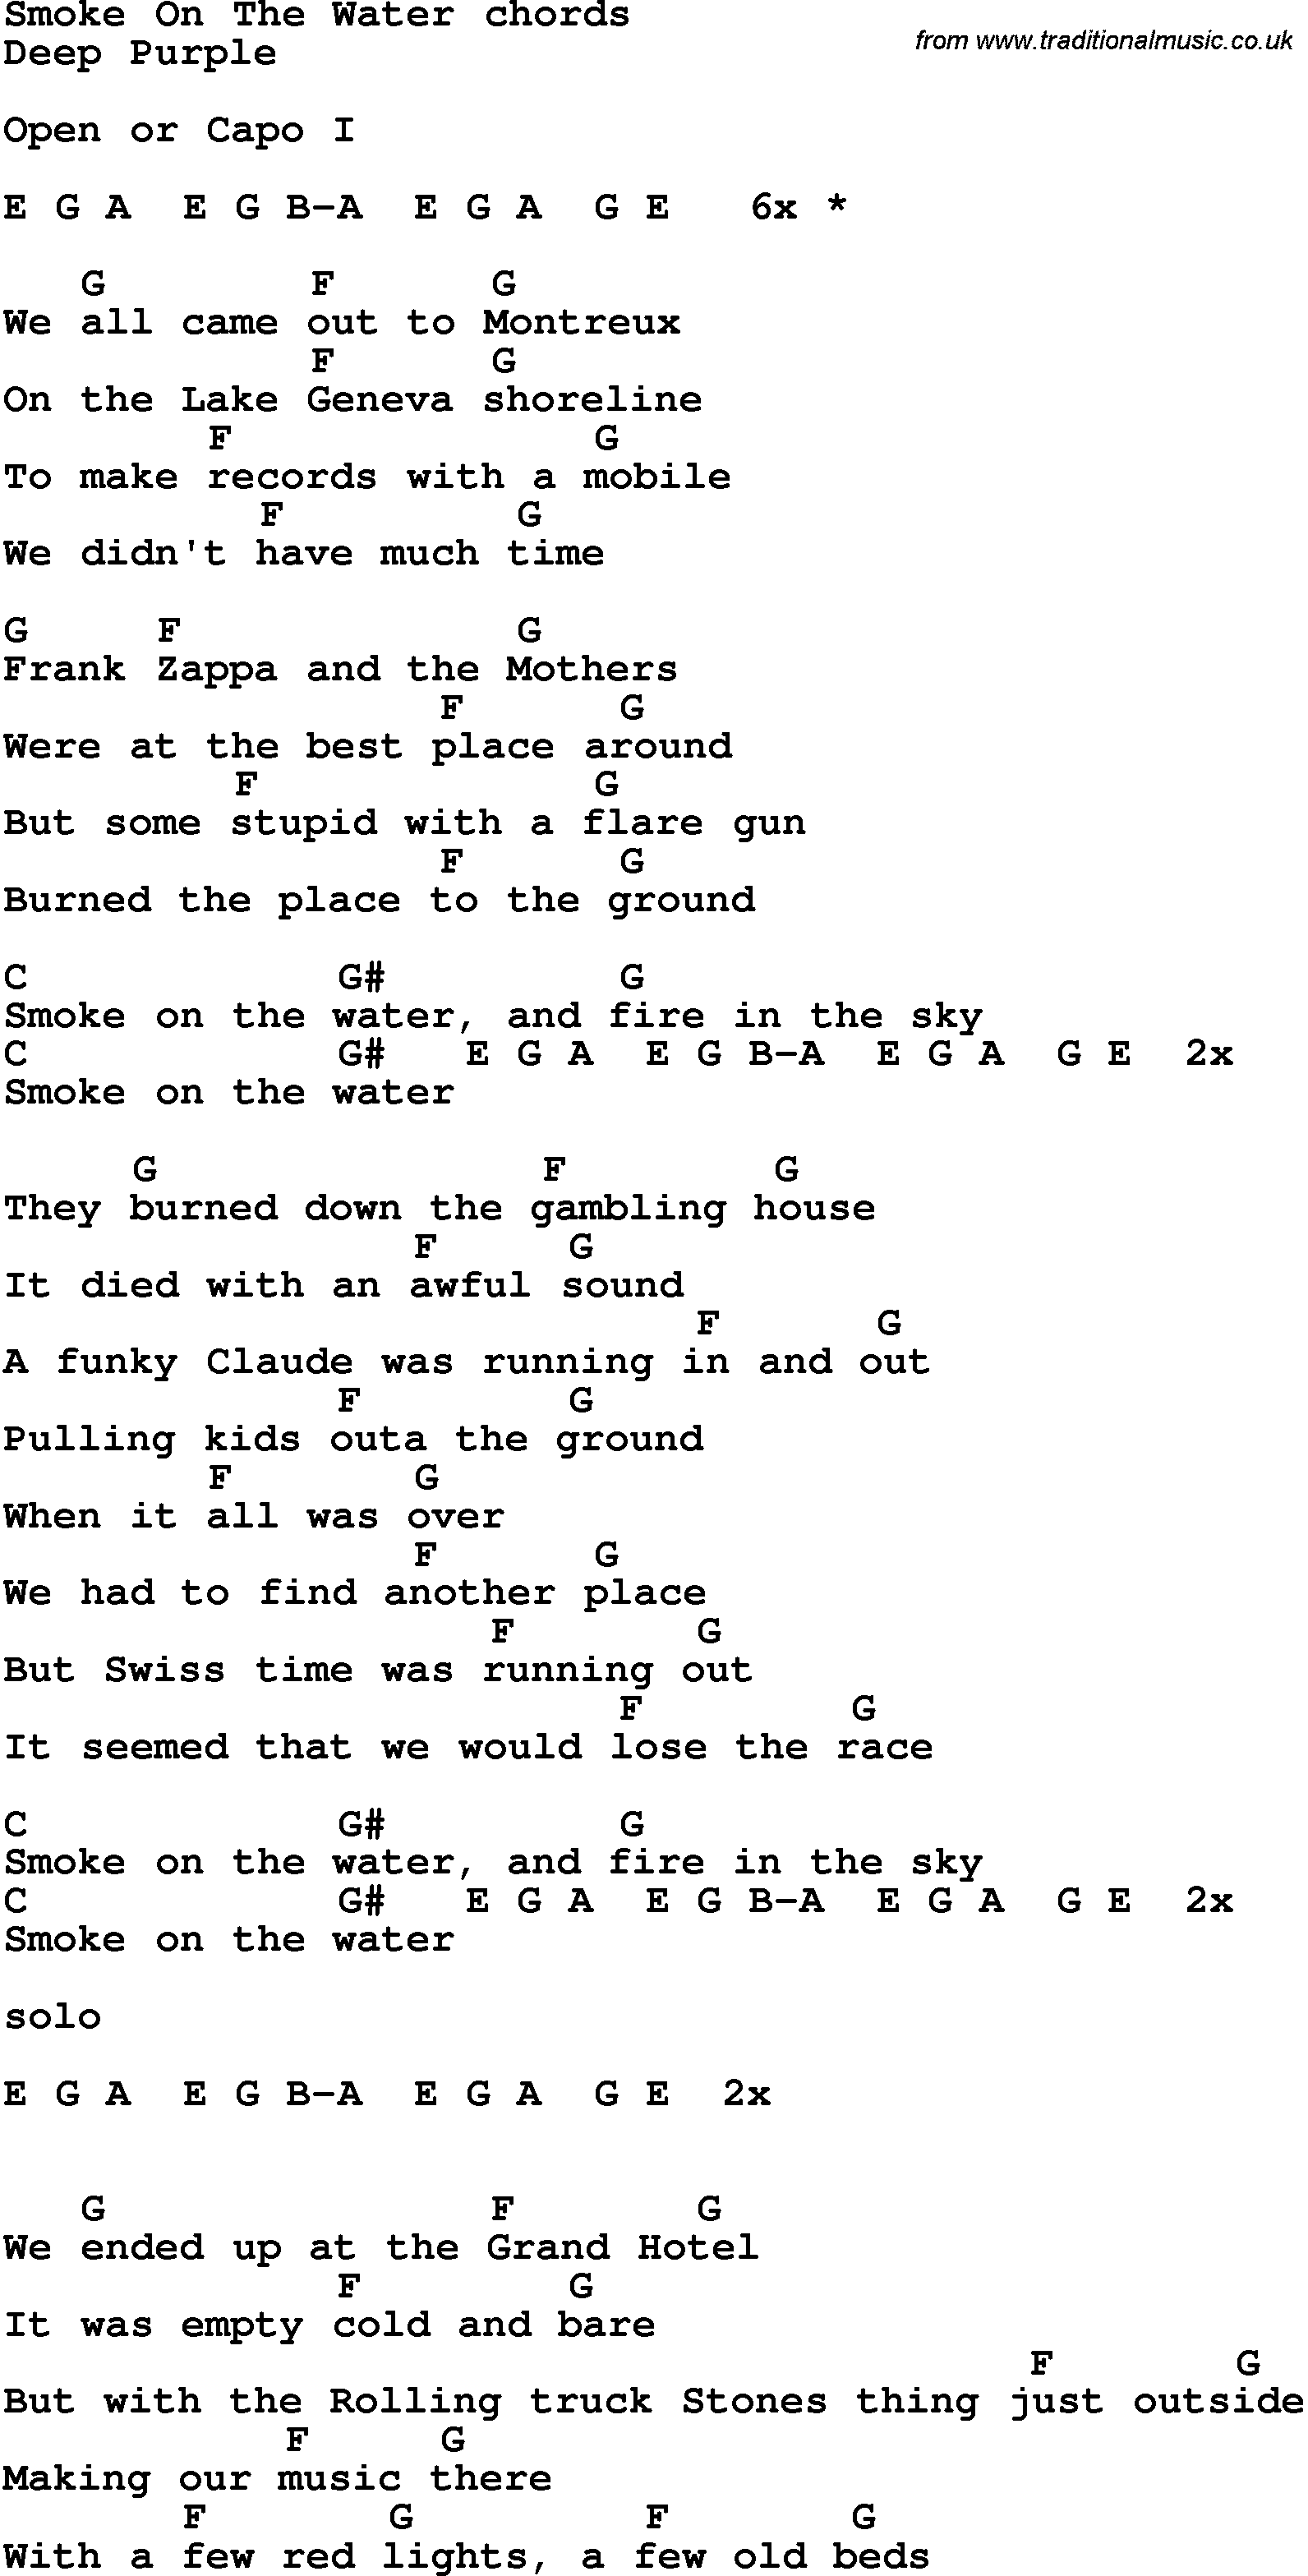 Song Lyrics with guitar chords for Smoke On The Water